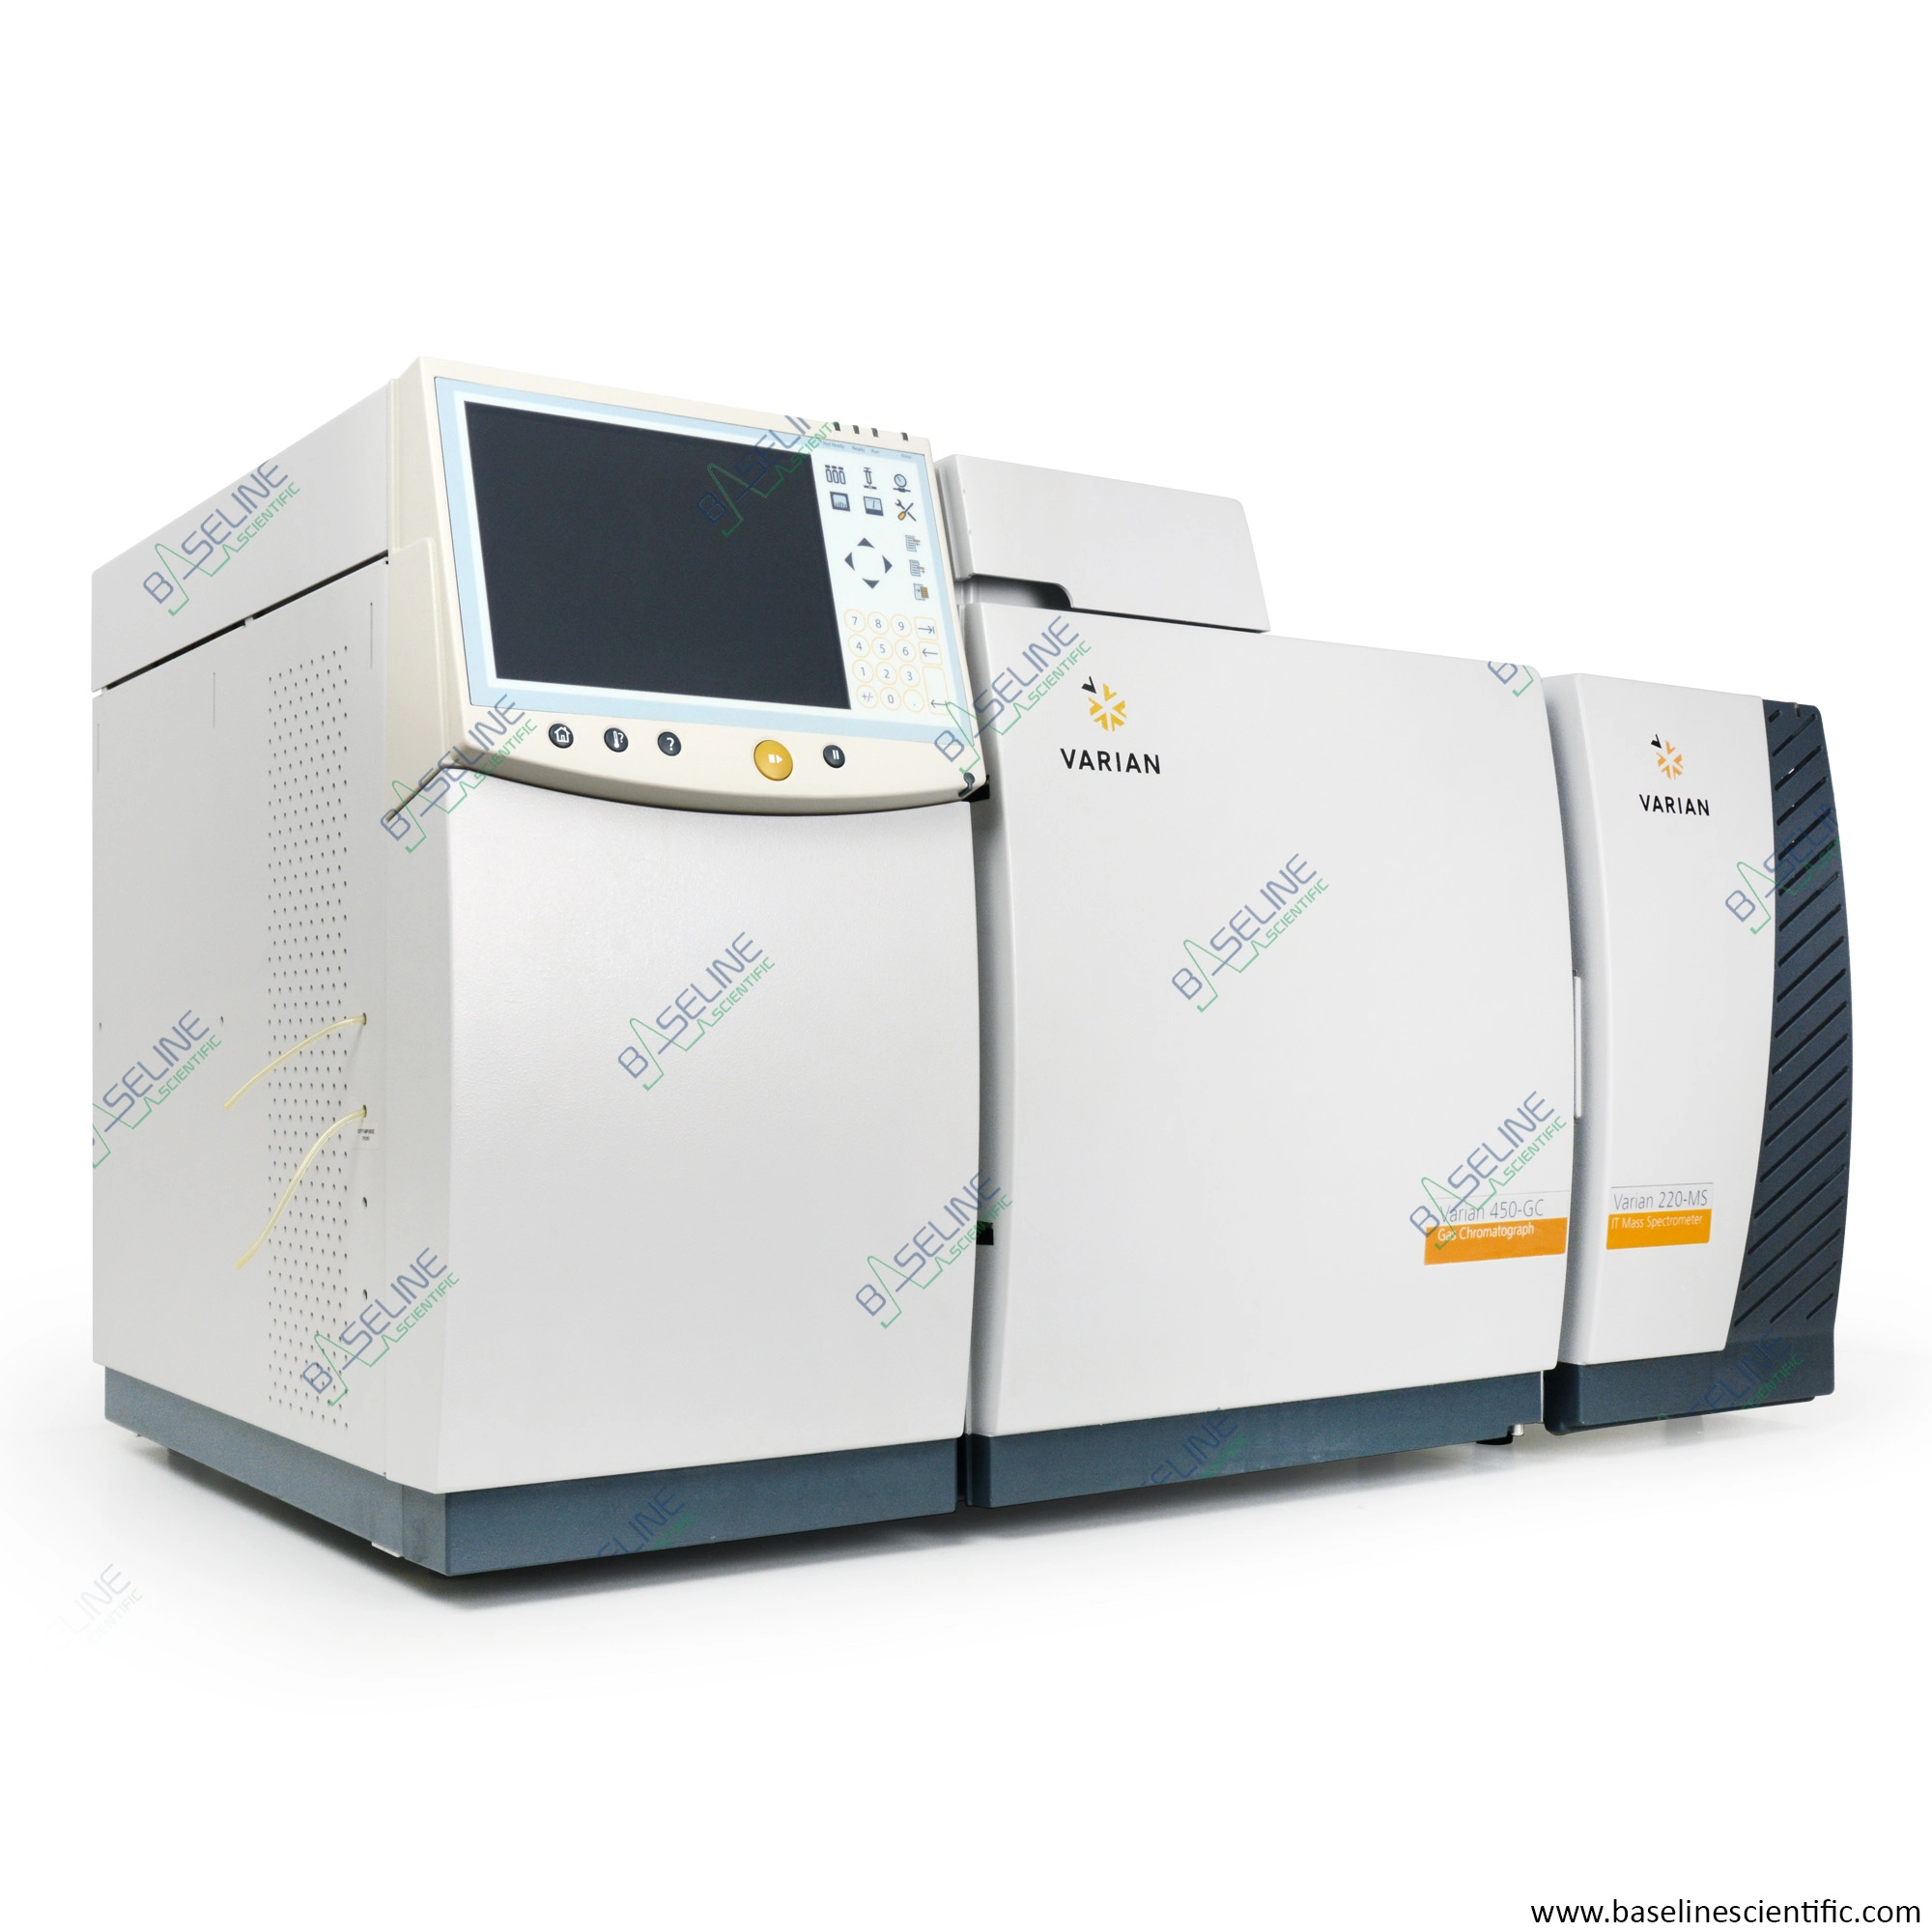 Refurbished Varian 450-GC Gas Chromatograph with 220-MS Ion Trap Mass Spectrometer